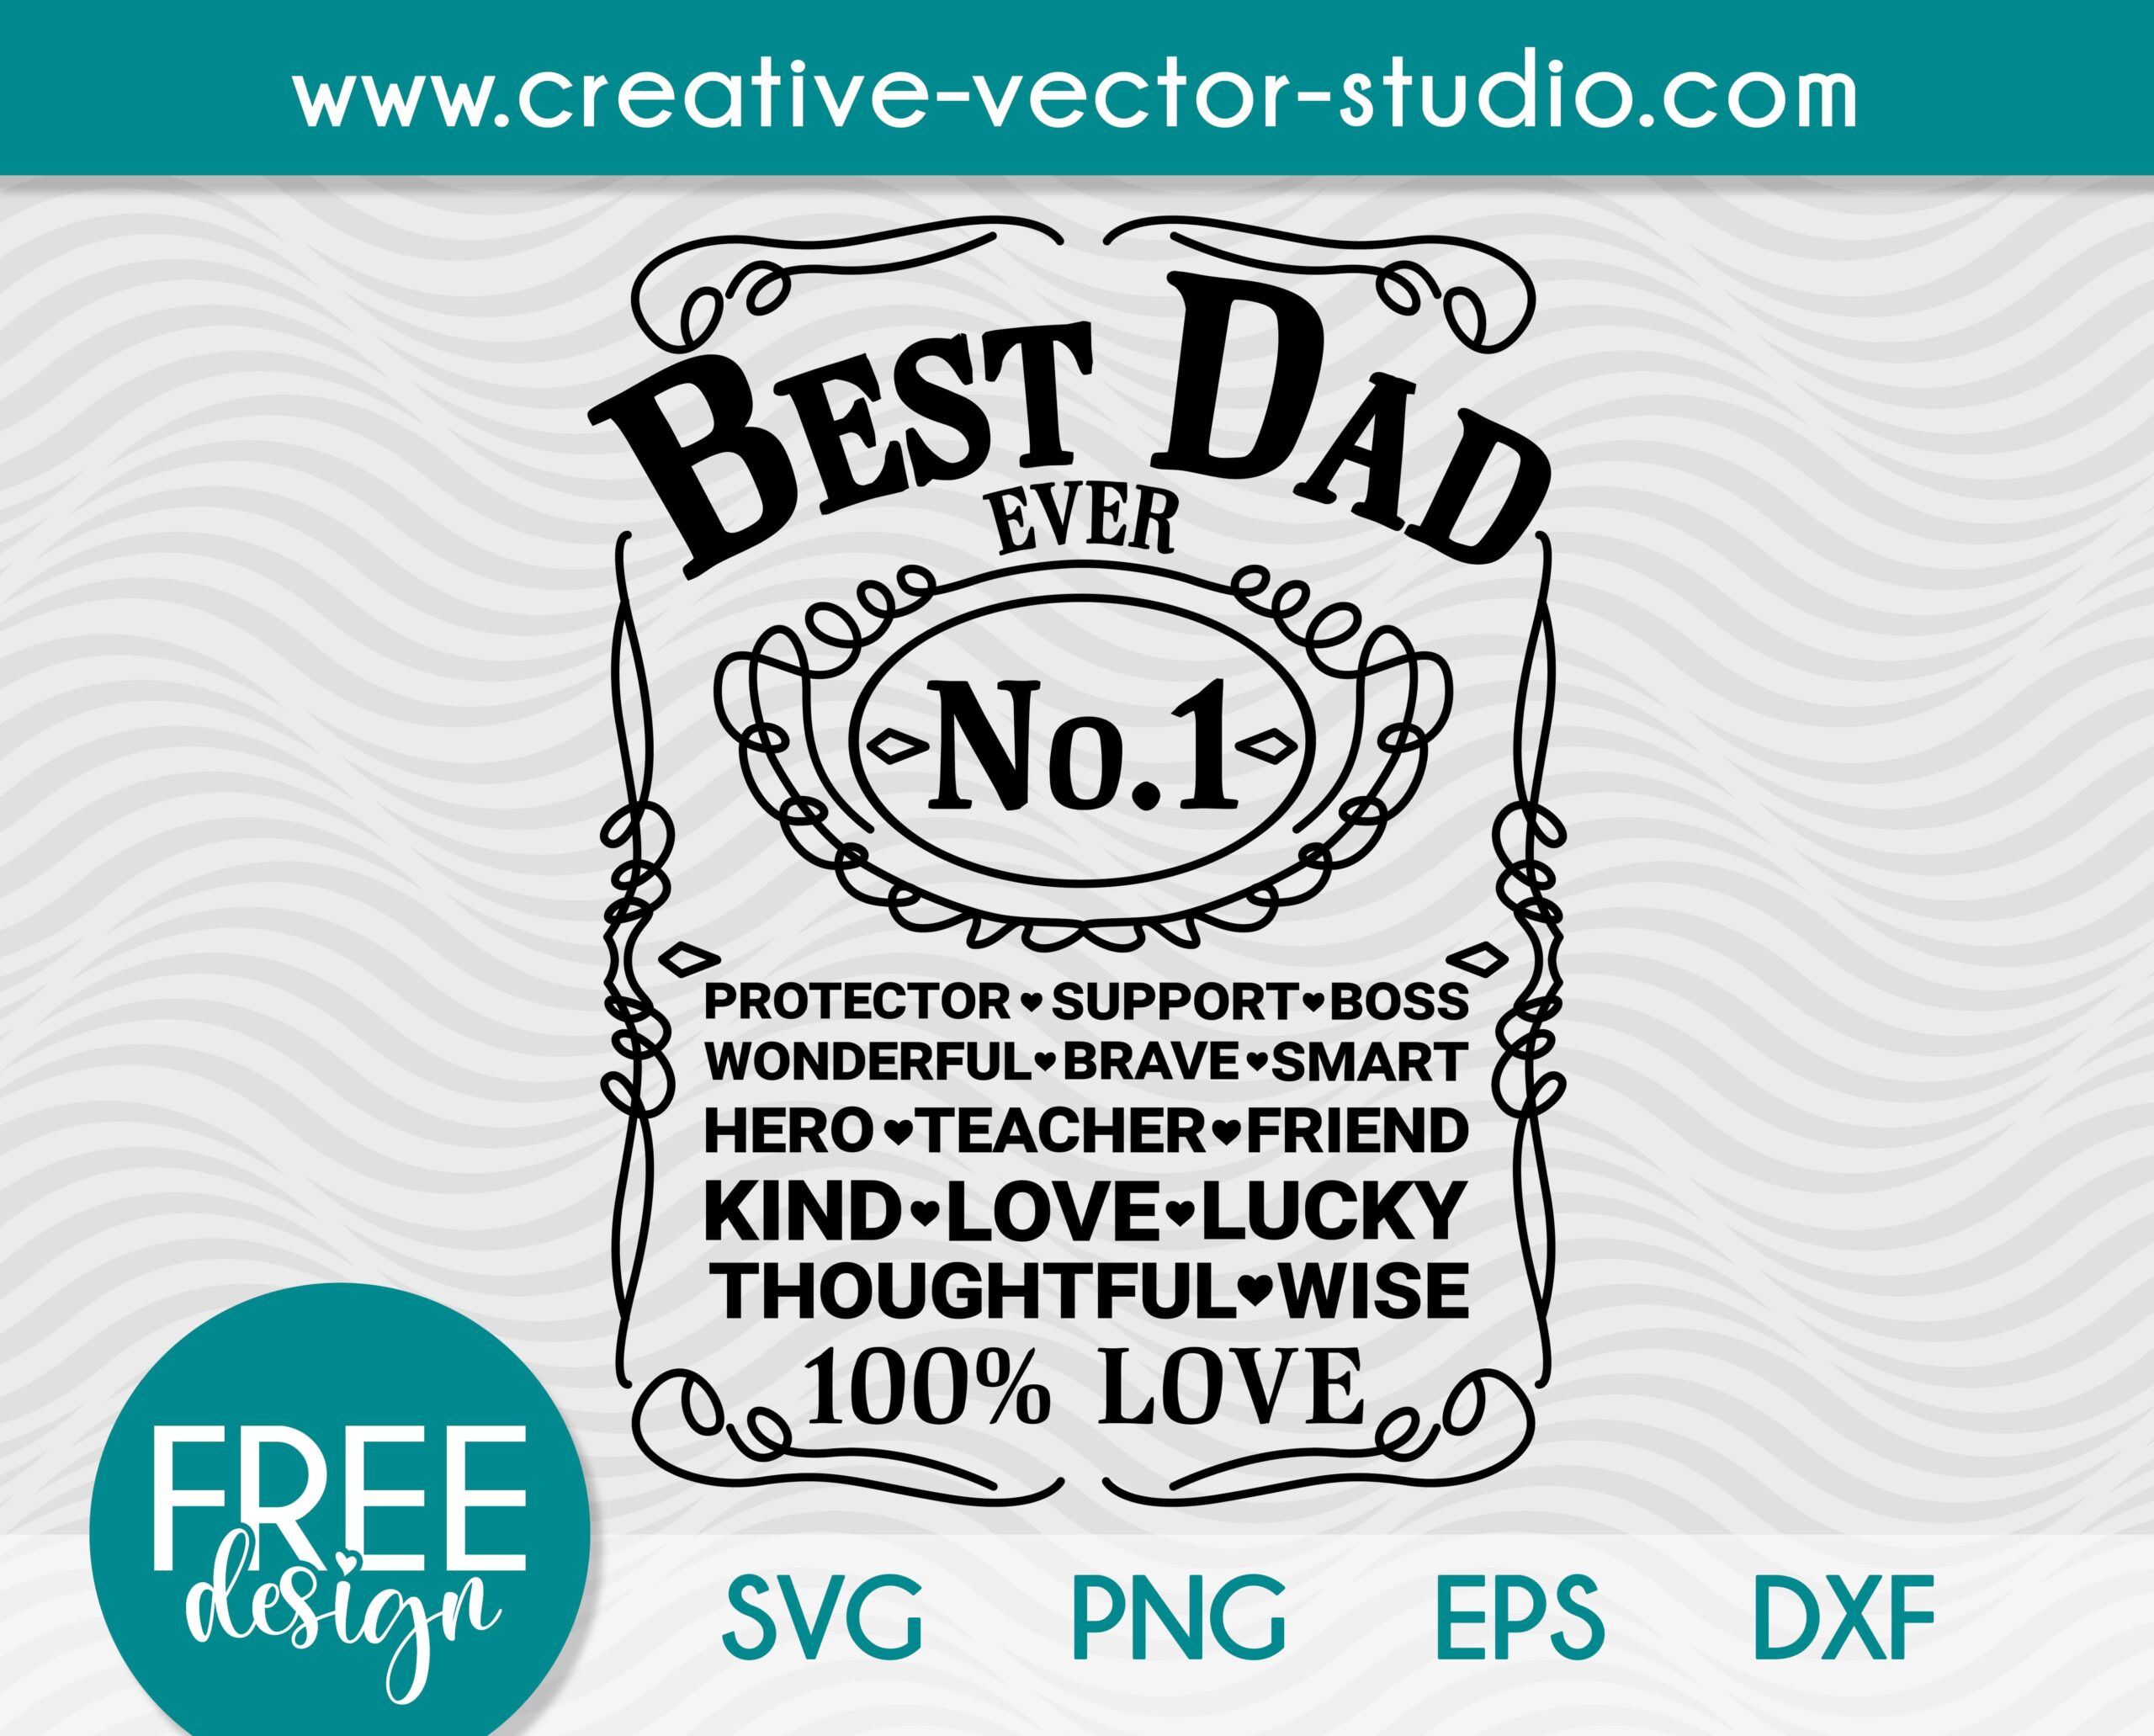 Free Best Dad Ever SVG, PNG, DXF, EPS - Creative Vector Studio